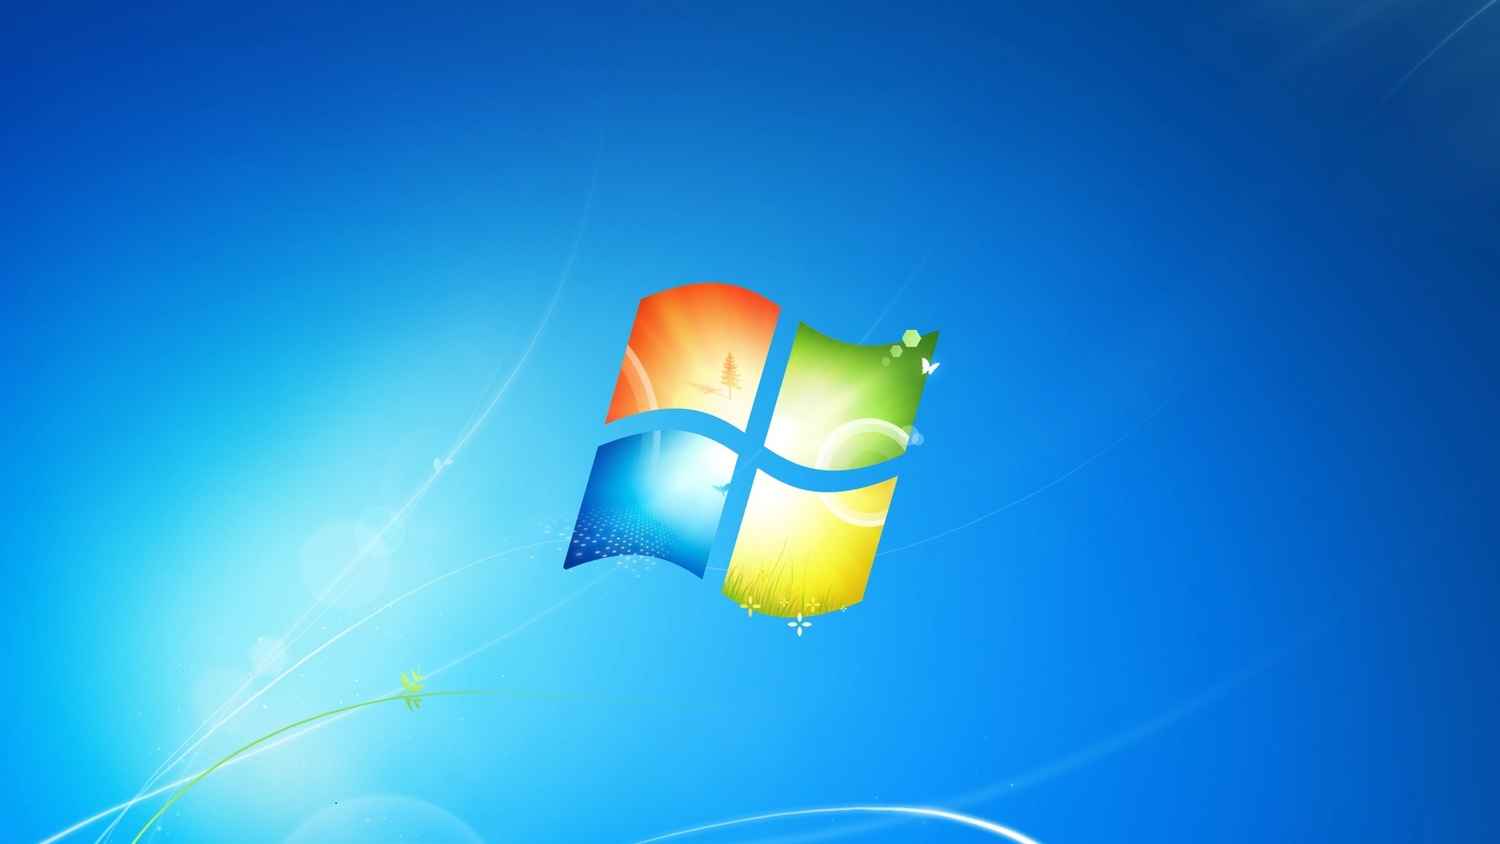 Here’s how you can officially download Windows 7 from the official Microsoft website